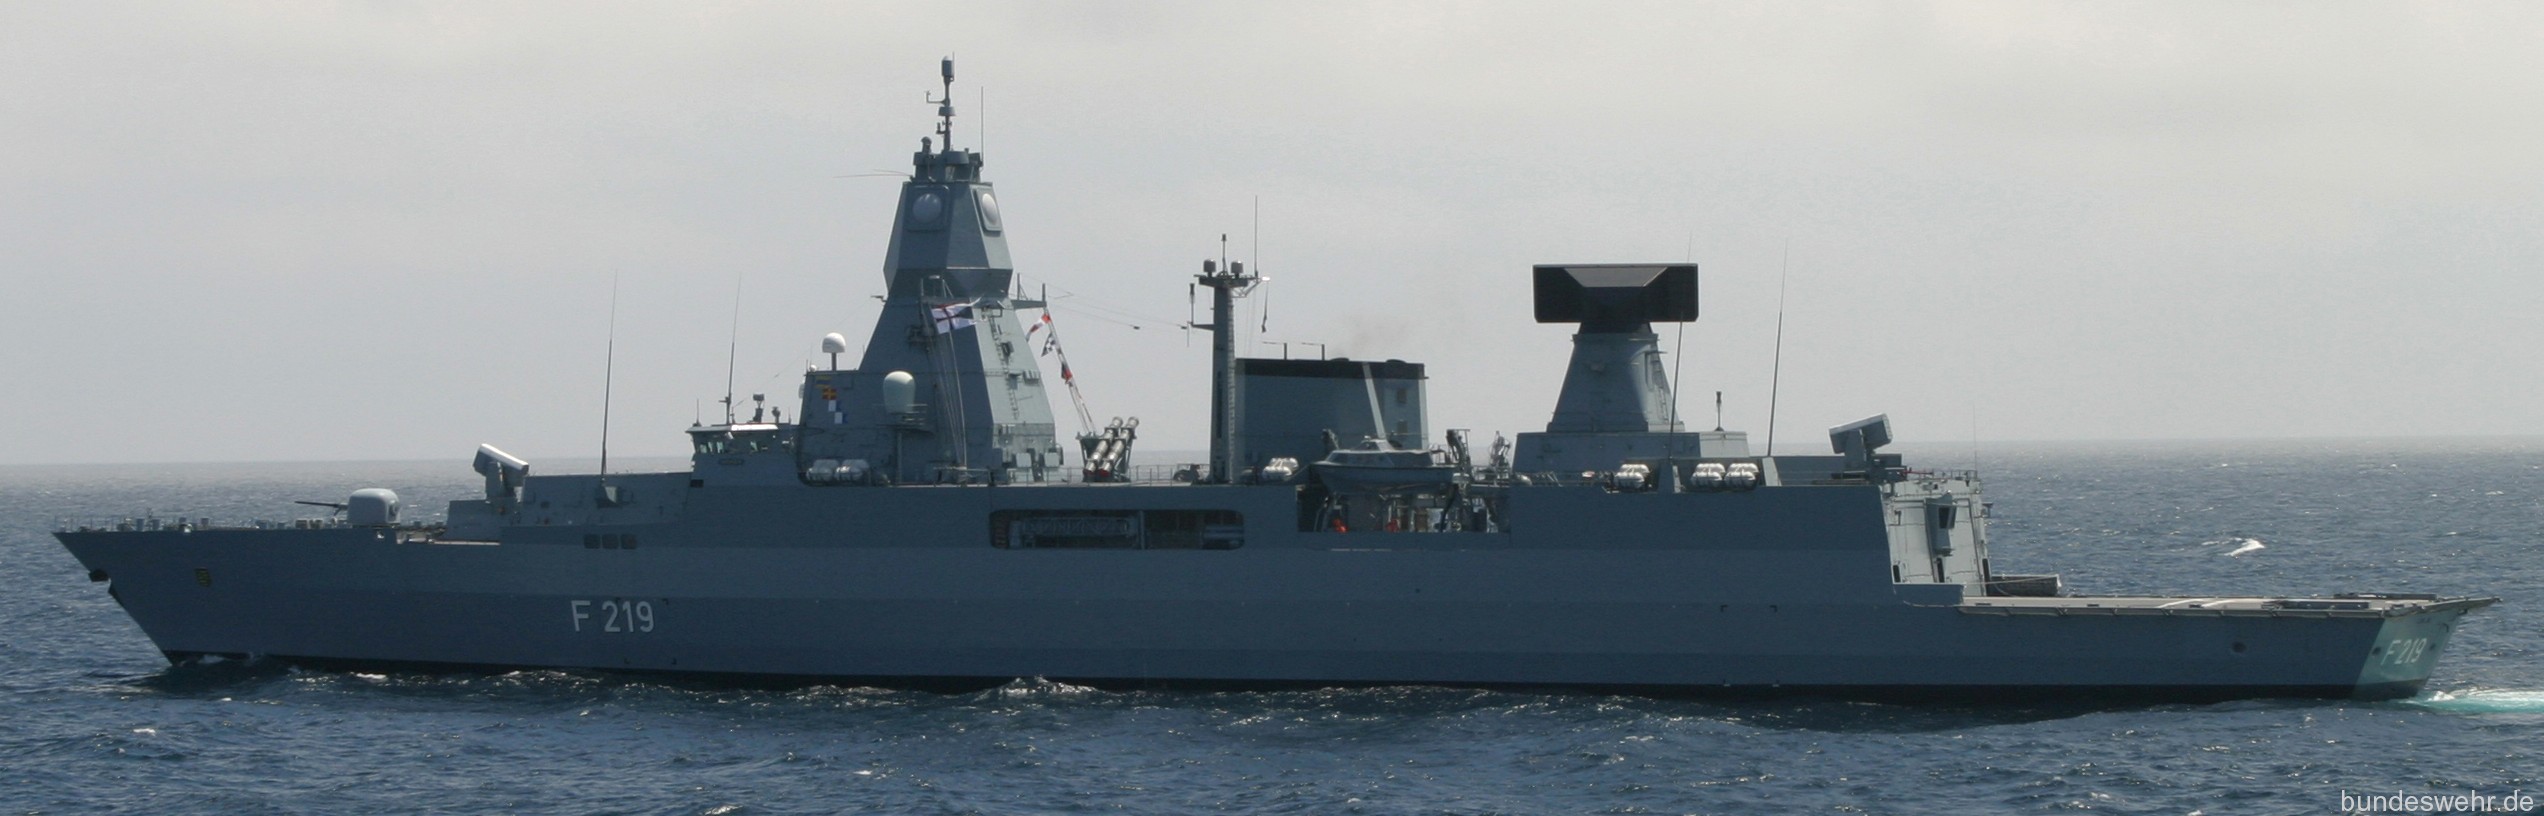 f-219 fgs sachsen type 124 class guided missile frigate ffg german navy 28